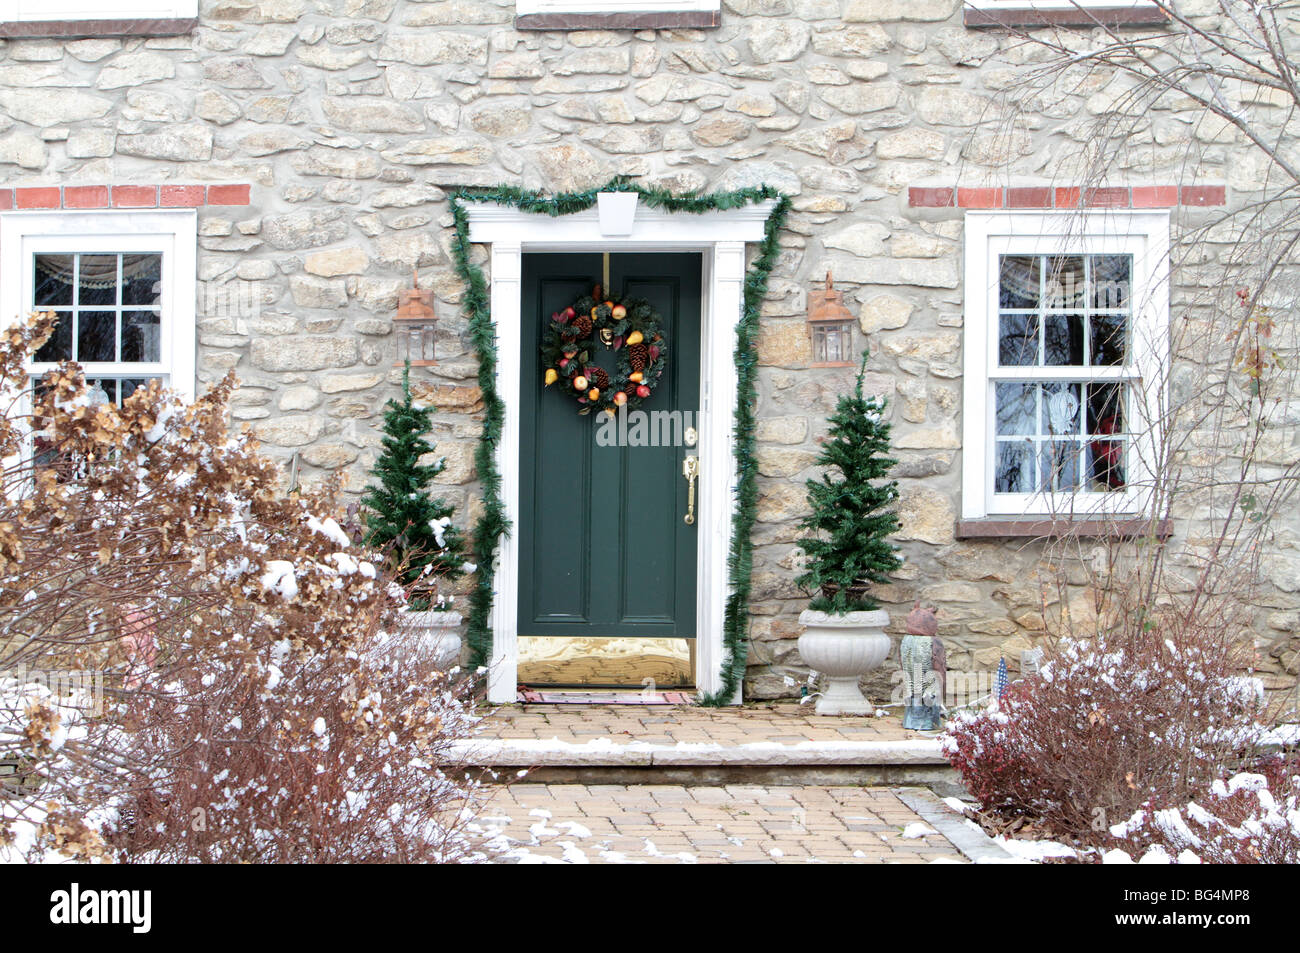 A beautiful shot of a vintage historic stone house decorated for Christmas. A wreath a green front door evergreens and garland. Stock Photo